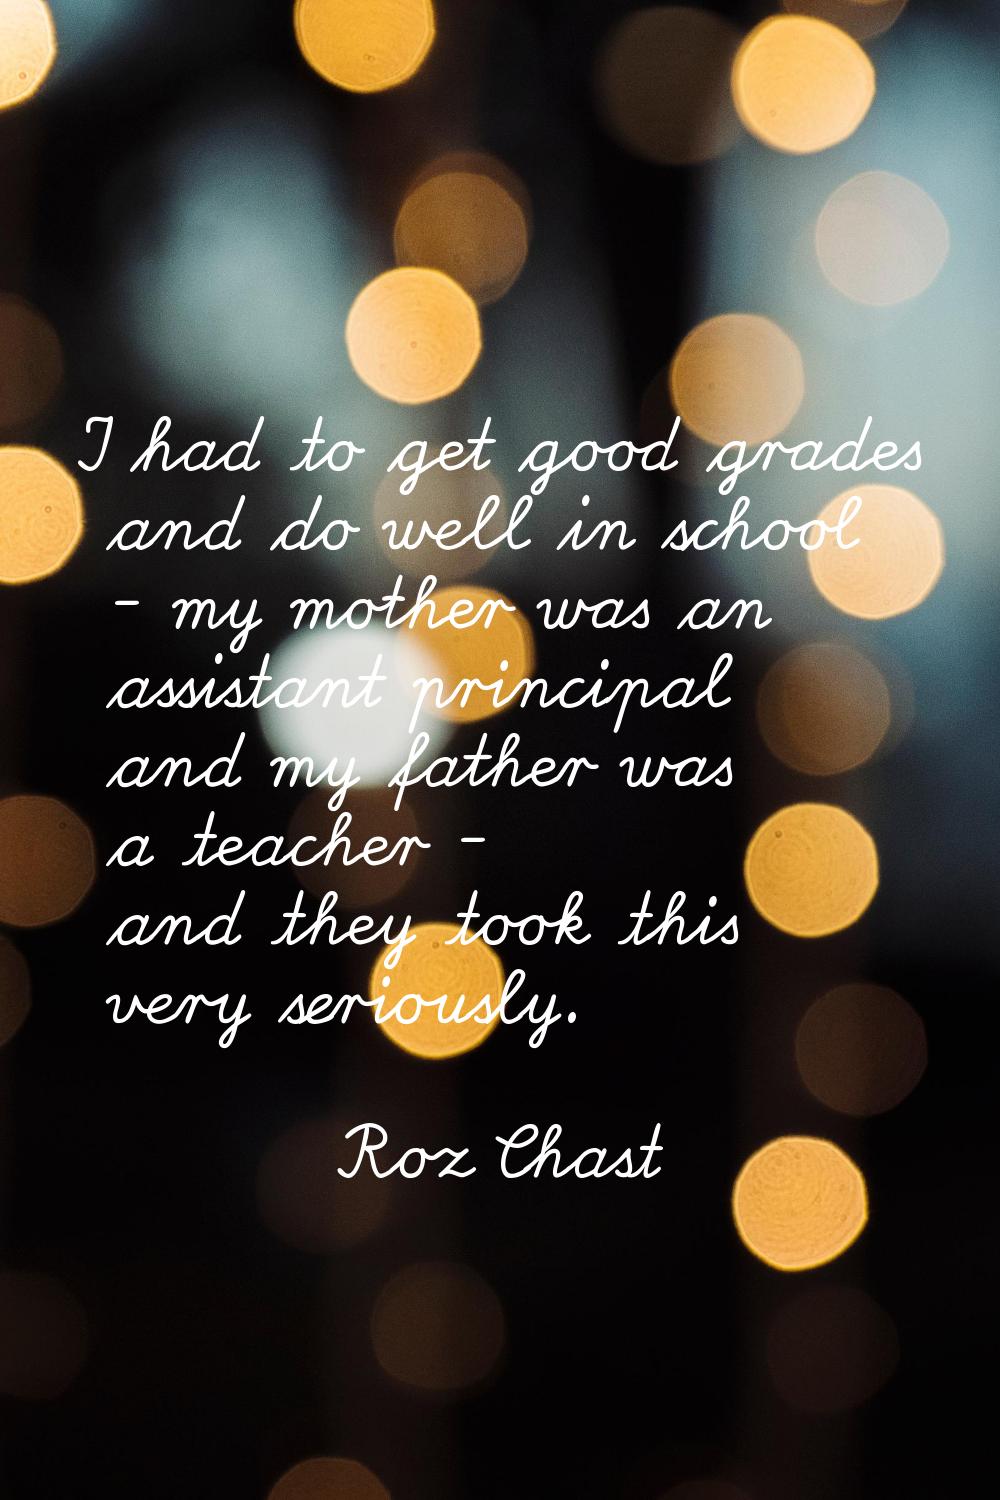 I had to get good grades and do well in school - my mother was an assistant principal and my father